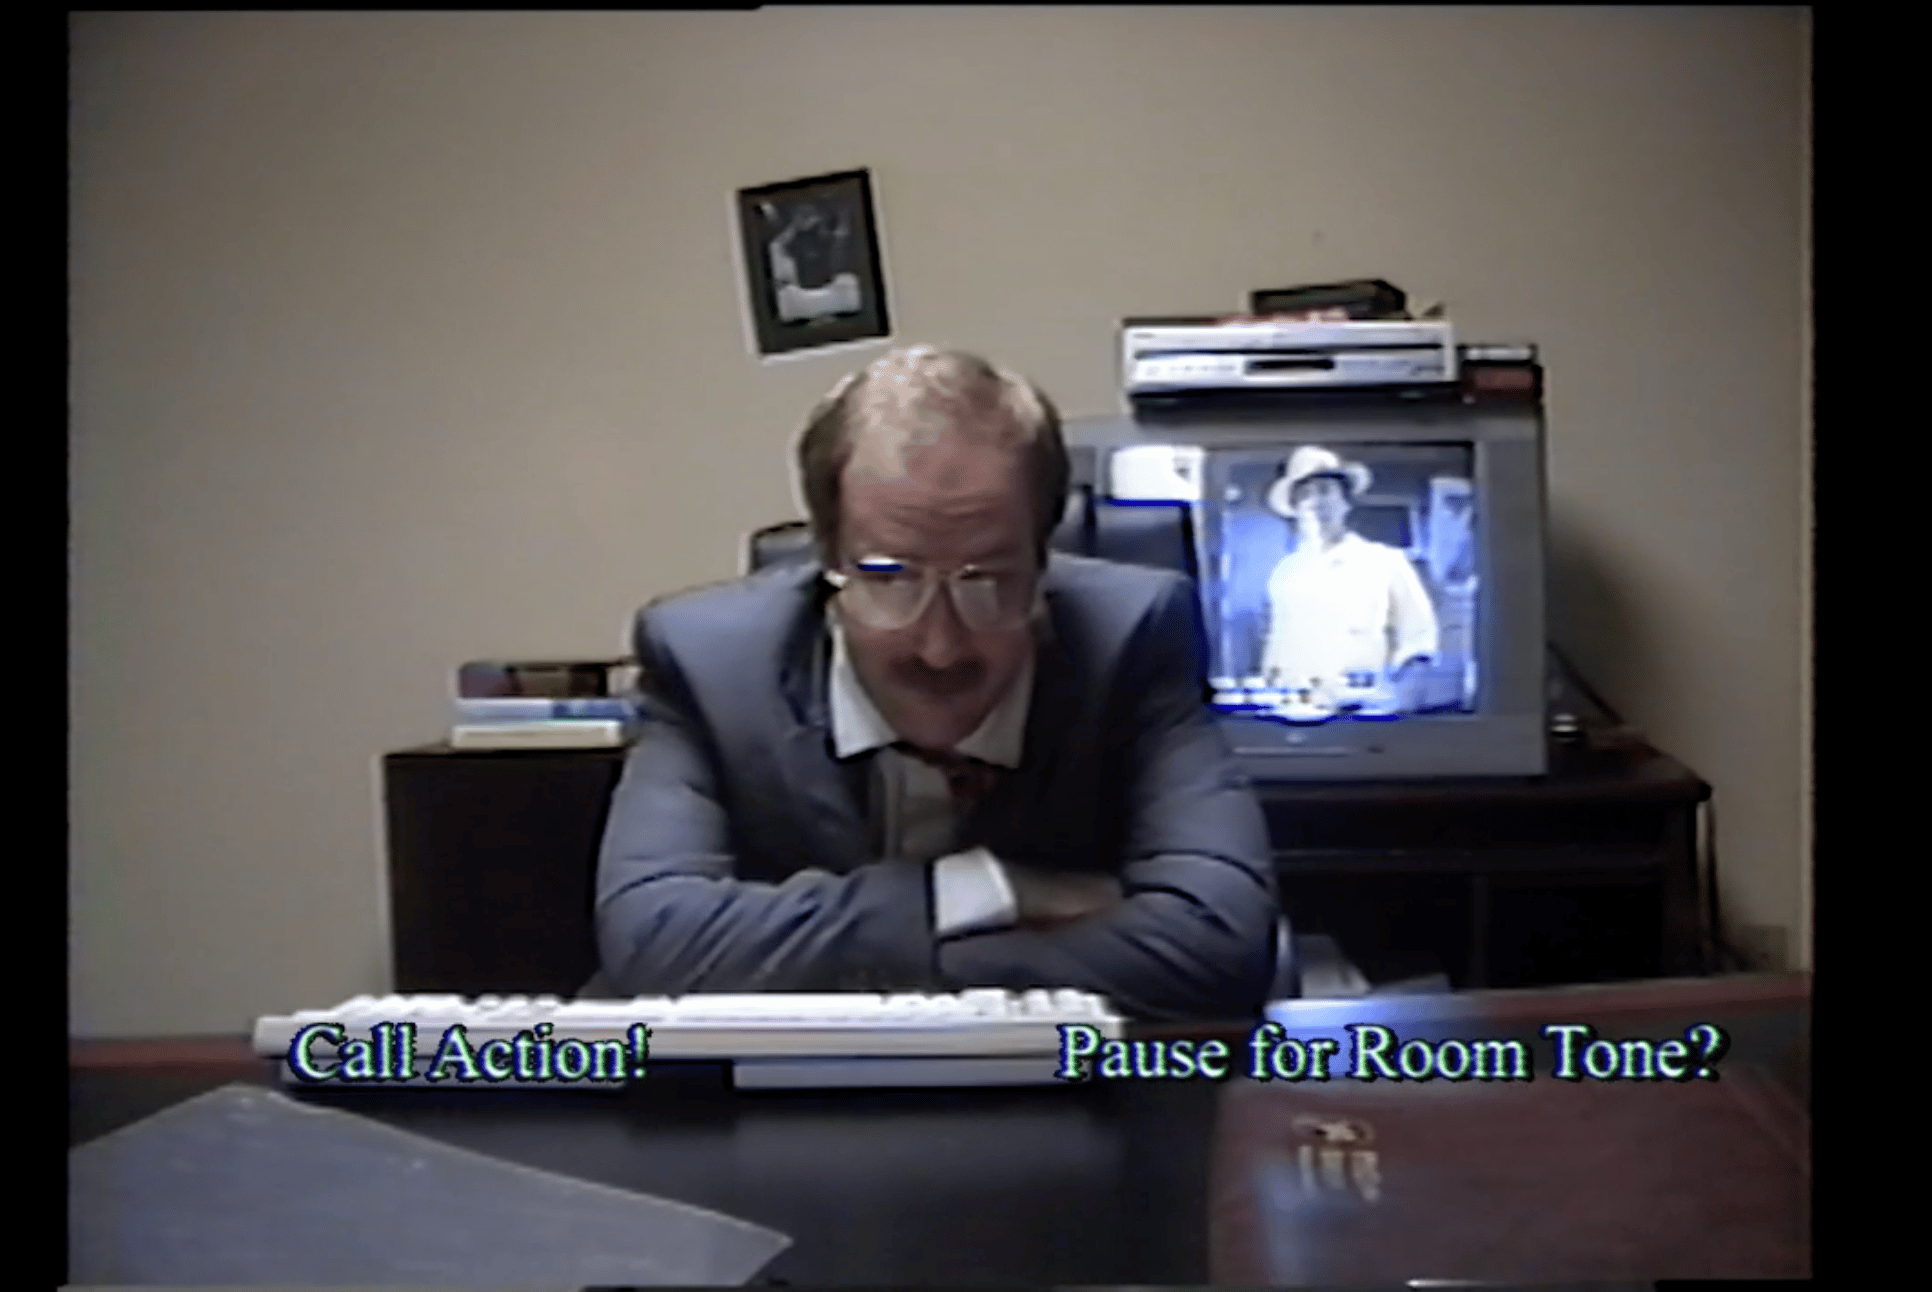 VHS camera footage - a man wearing glasses and a suit and sits at a desk. There is a TV behind him. Two choices are given on screen: "Call for action", "pause for room tone"